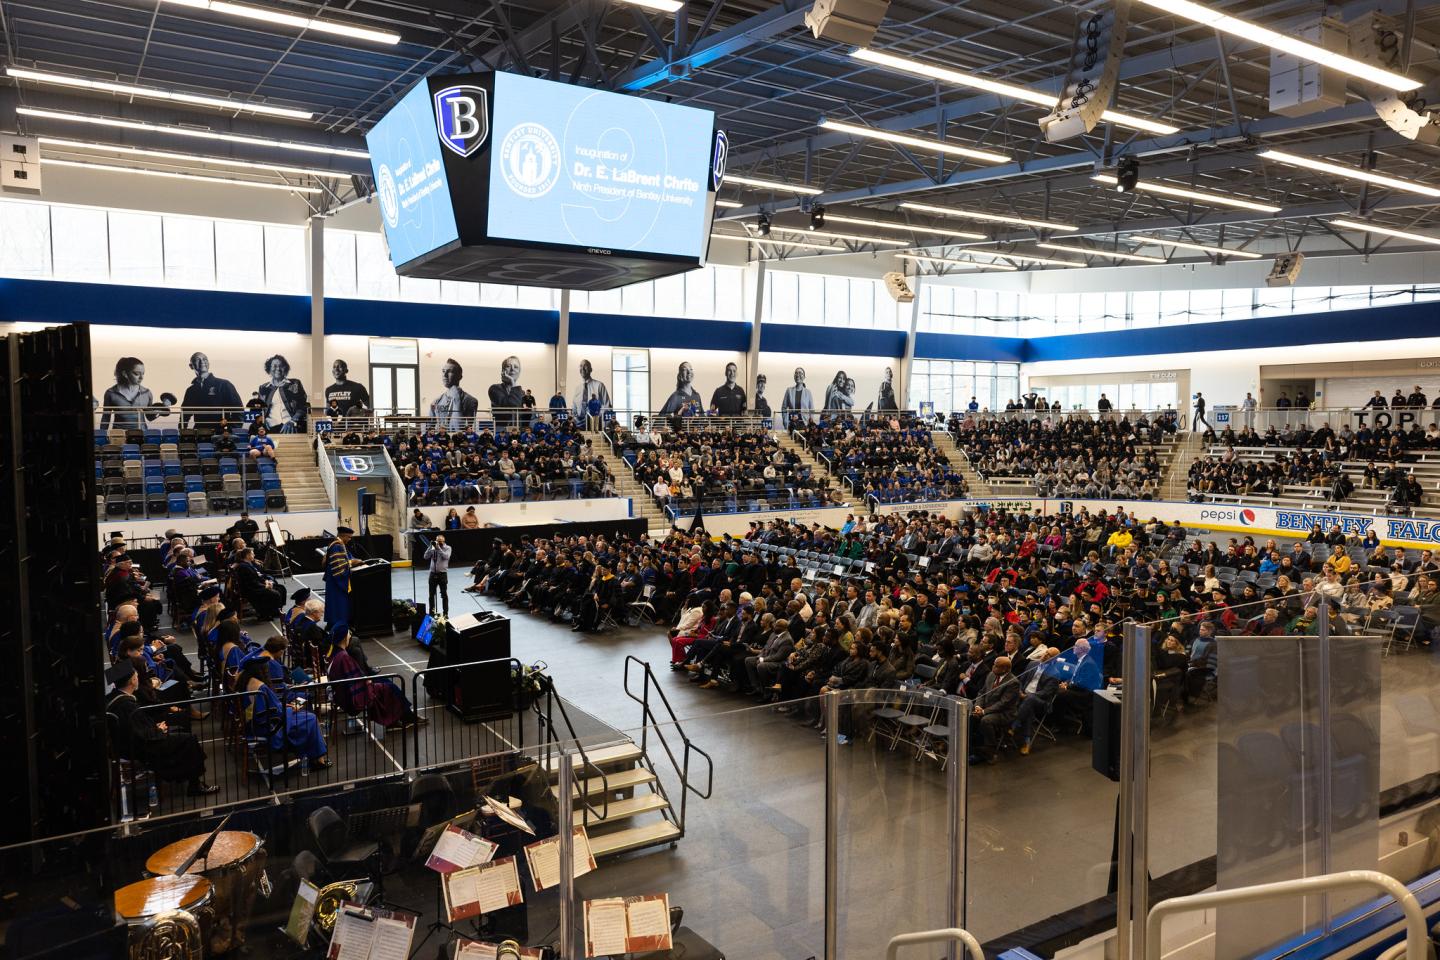 The Bentley Arena full with guests during inauguration